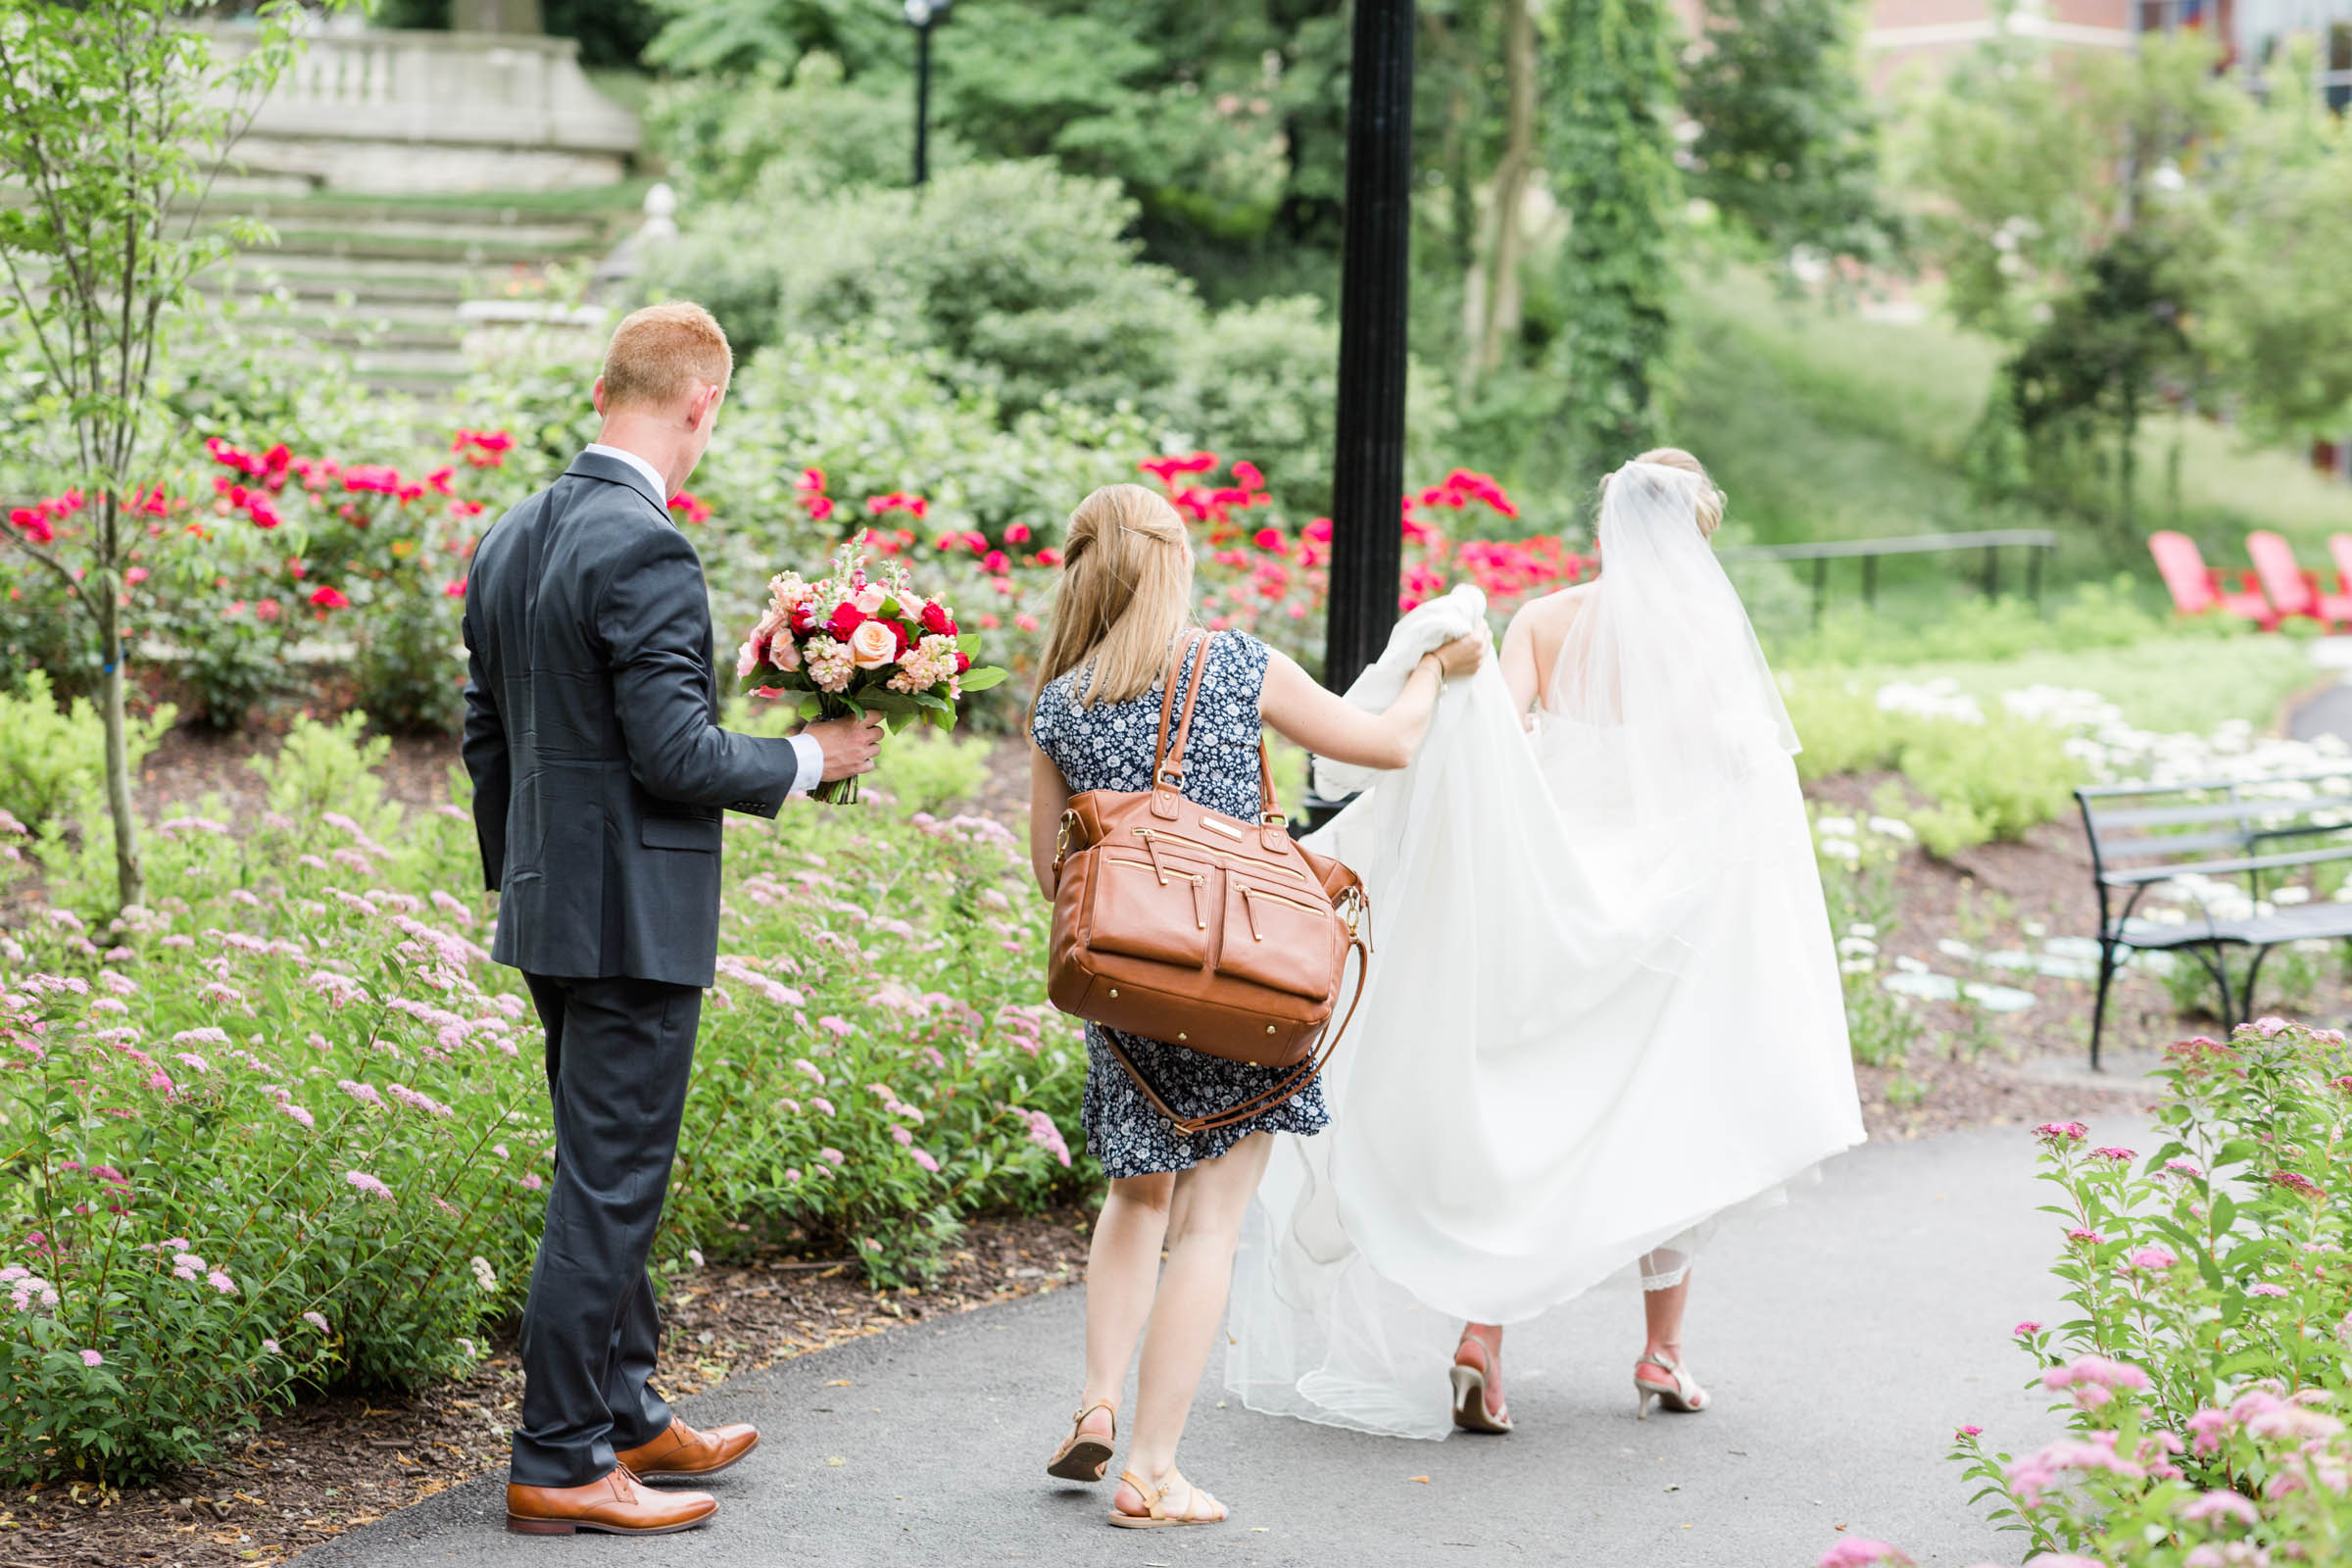 2019 Behind The Scenes of Sweet Williams Photography. Becca Musayev is a wedding, engagement and portrait photographer serving the Nashville, Tennesee locations and beyond!